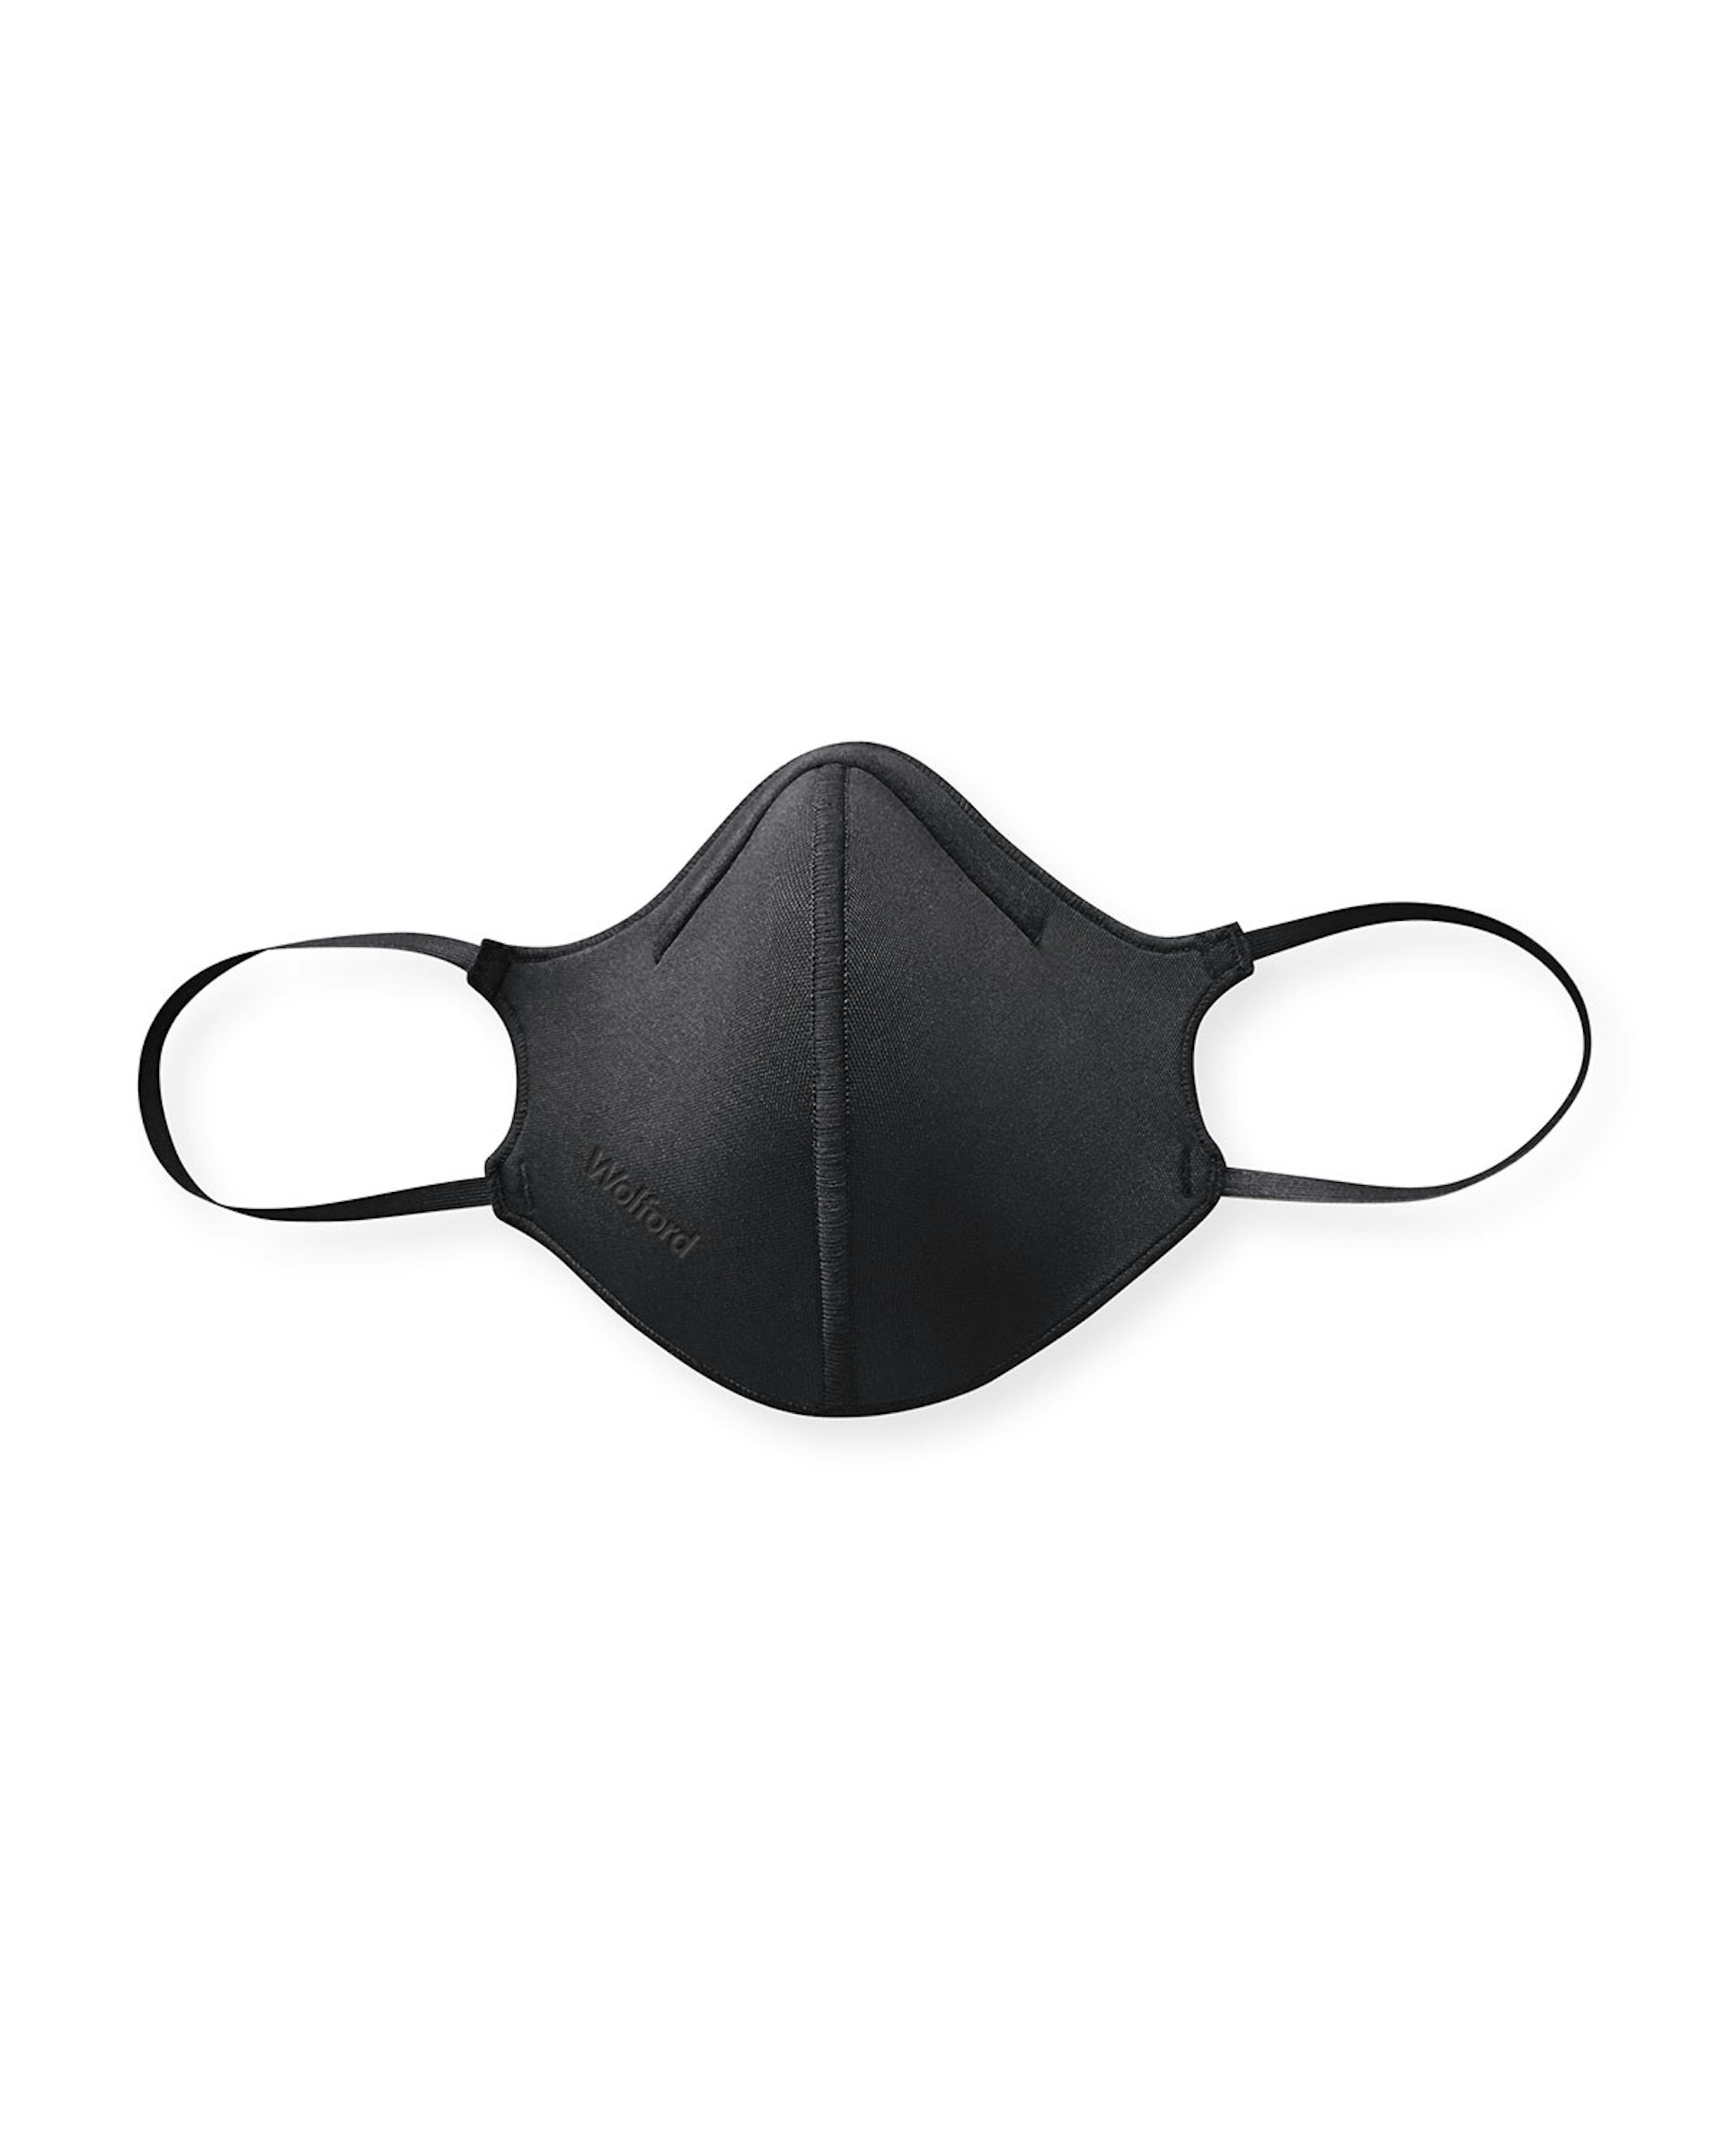 A black mask with elastic ear loops